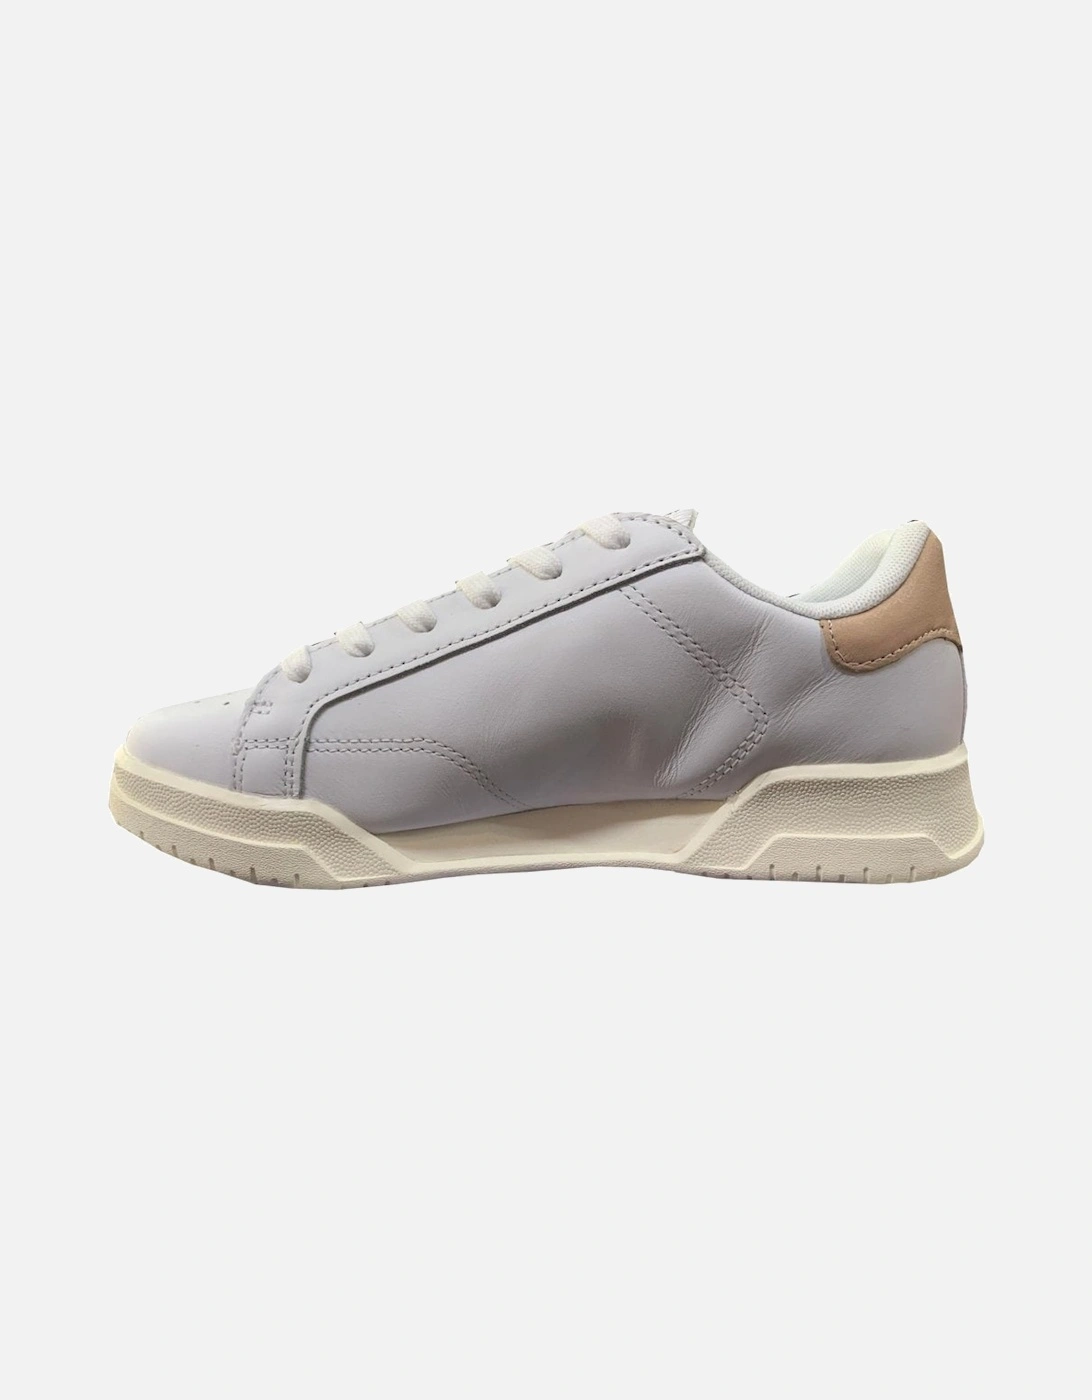 Women's Twin Serve White And Light PinkTrainers.